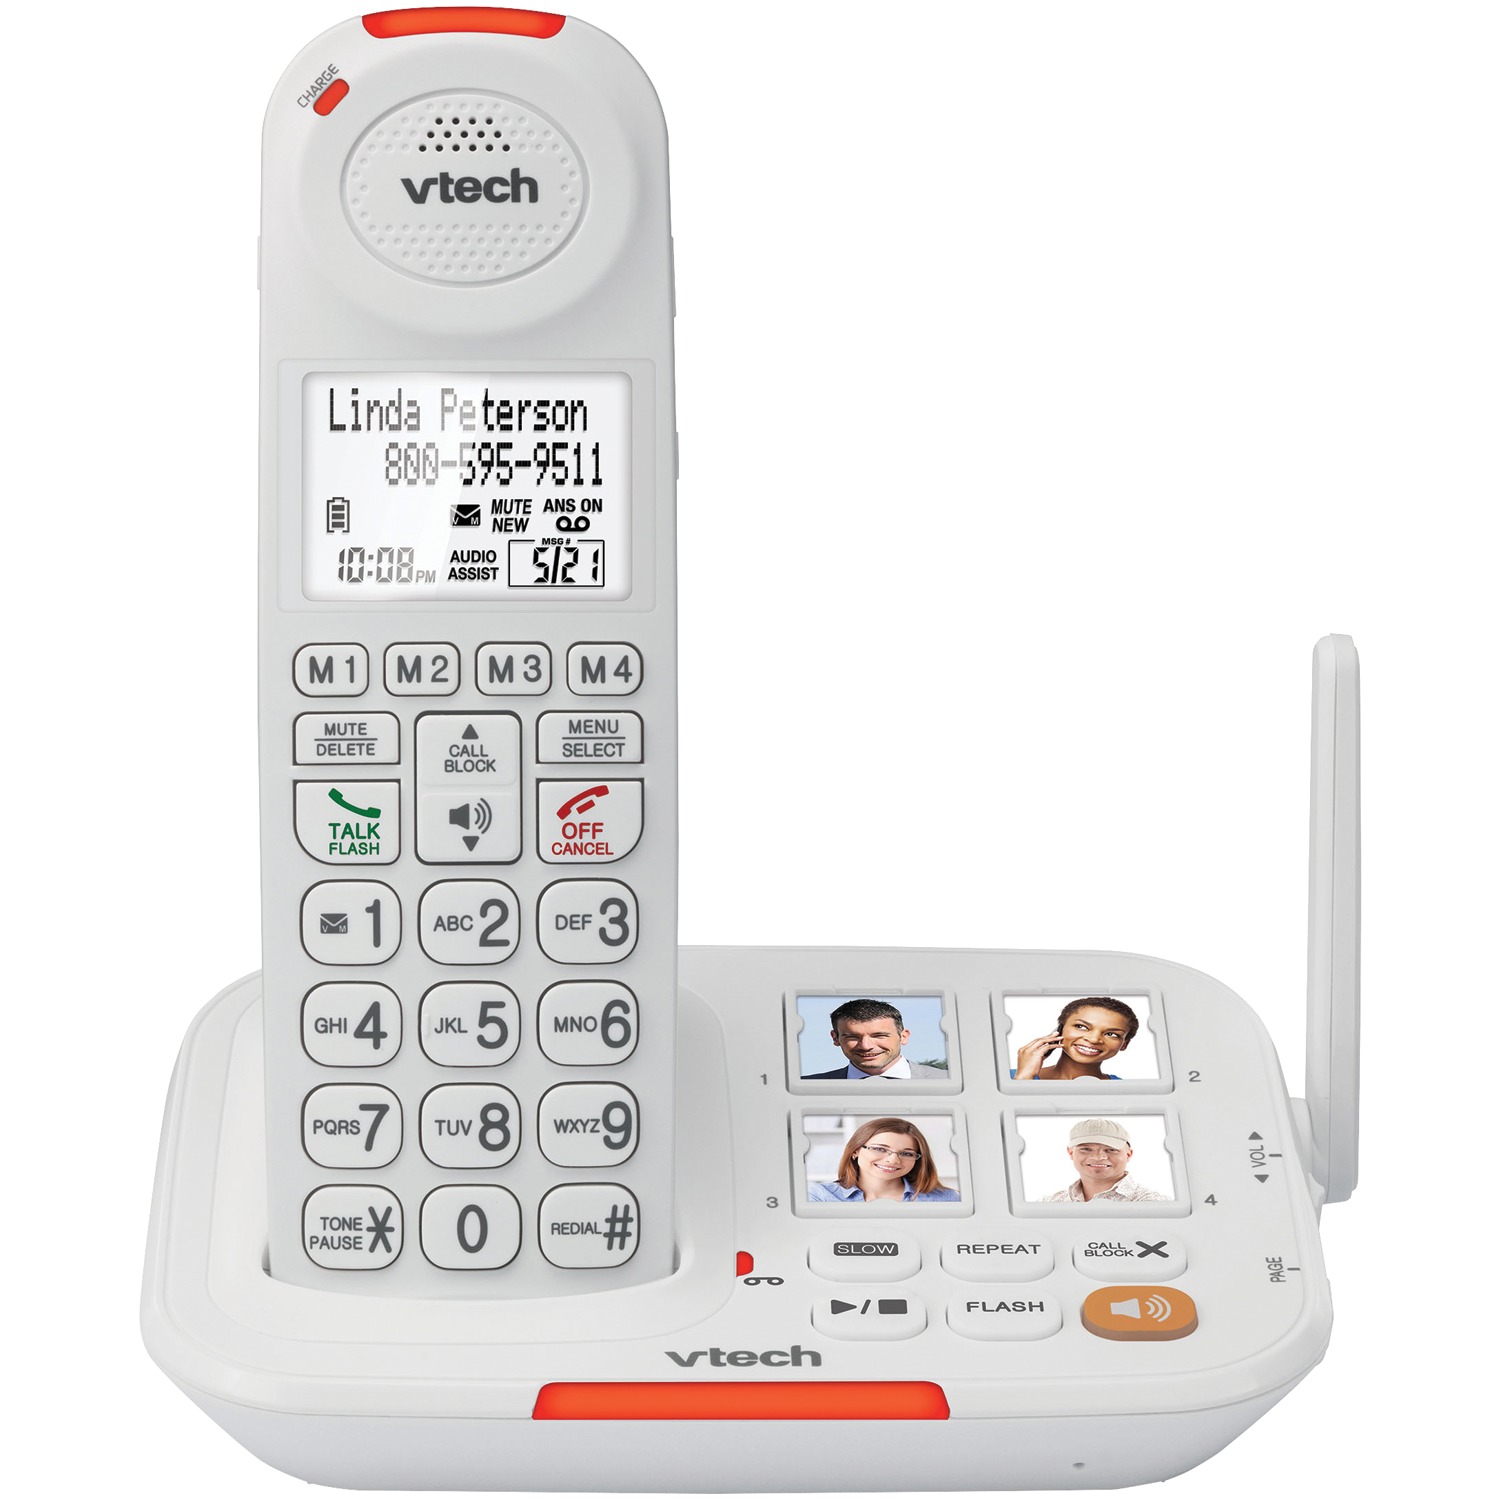 VTech VTSN5127 Amplified Cordless Answering System with Big Buttons & Display - image 1 of 3